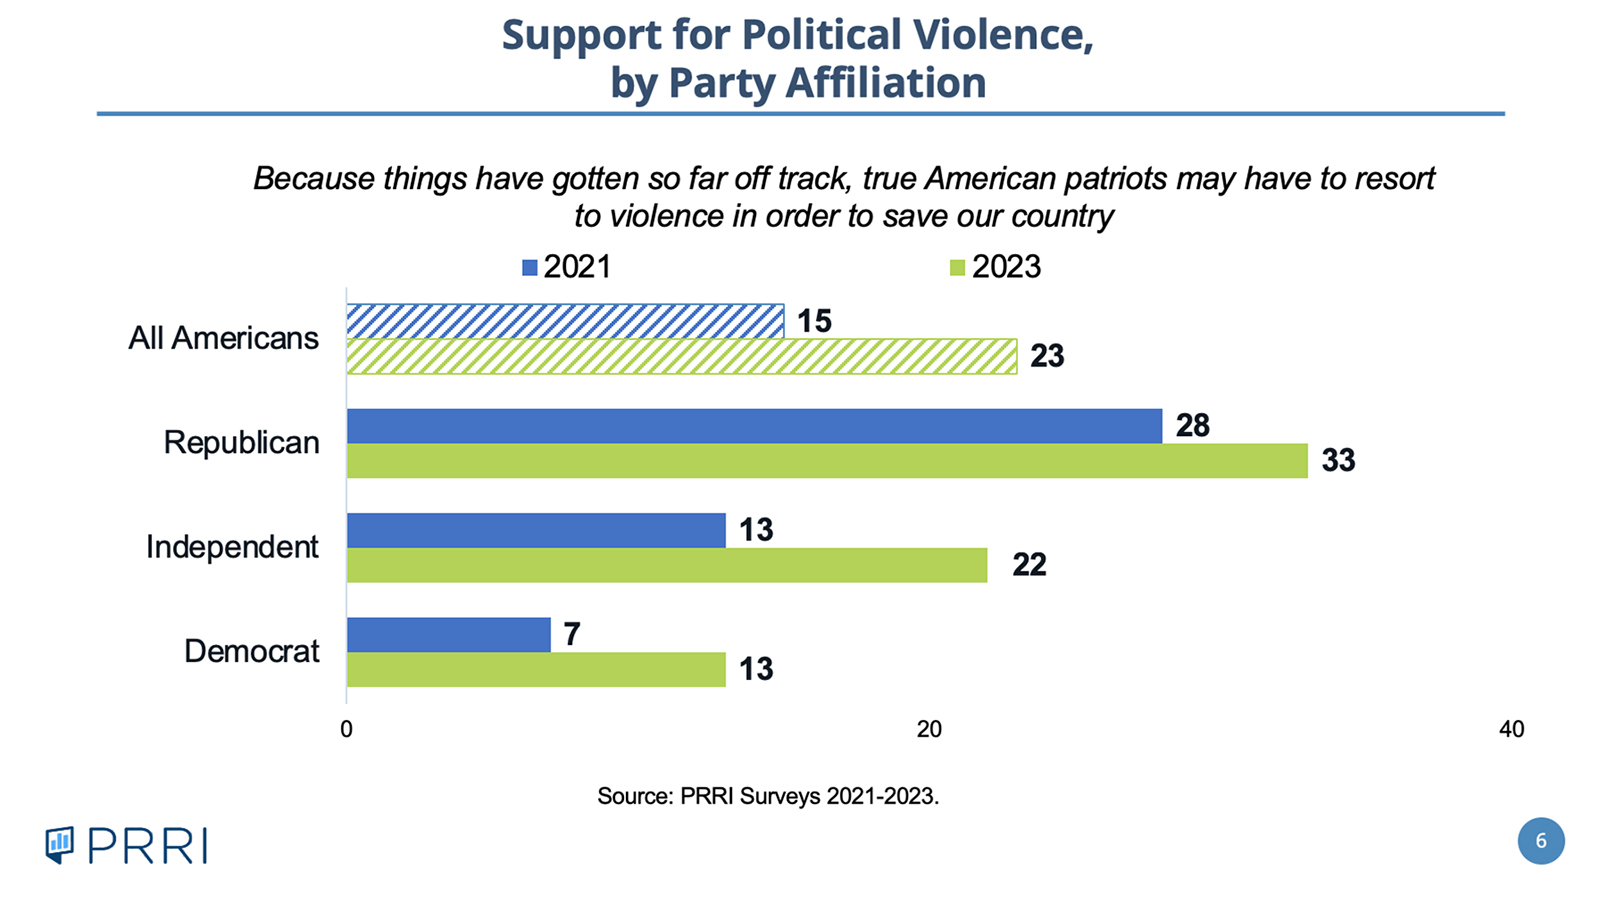 "Support for Political Violence, by Party Affiliation" (Graphic courtesy PRRI)